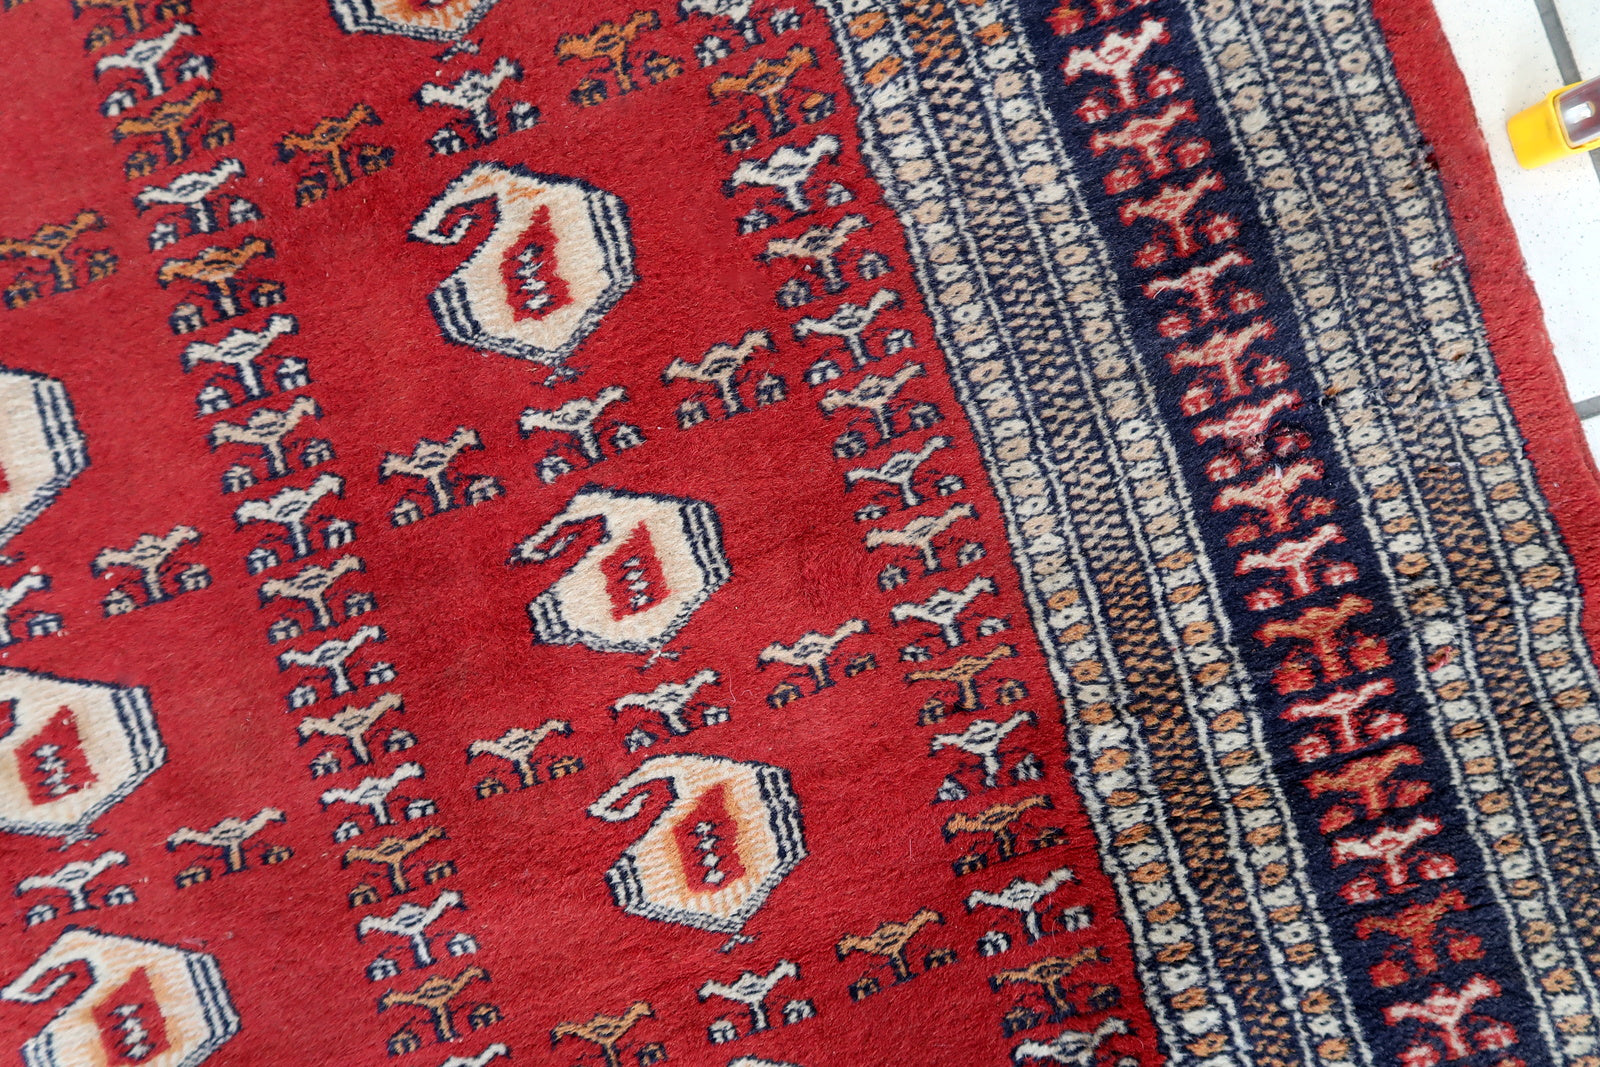 Handmade vintage Uzbek Bukhara rug in red color. The rug has been made in wool in the middle of 20th century. It is in original condition, it has some low pile.